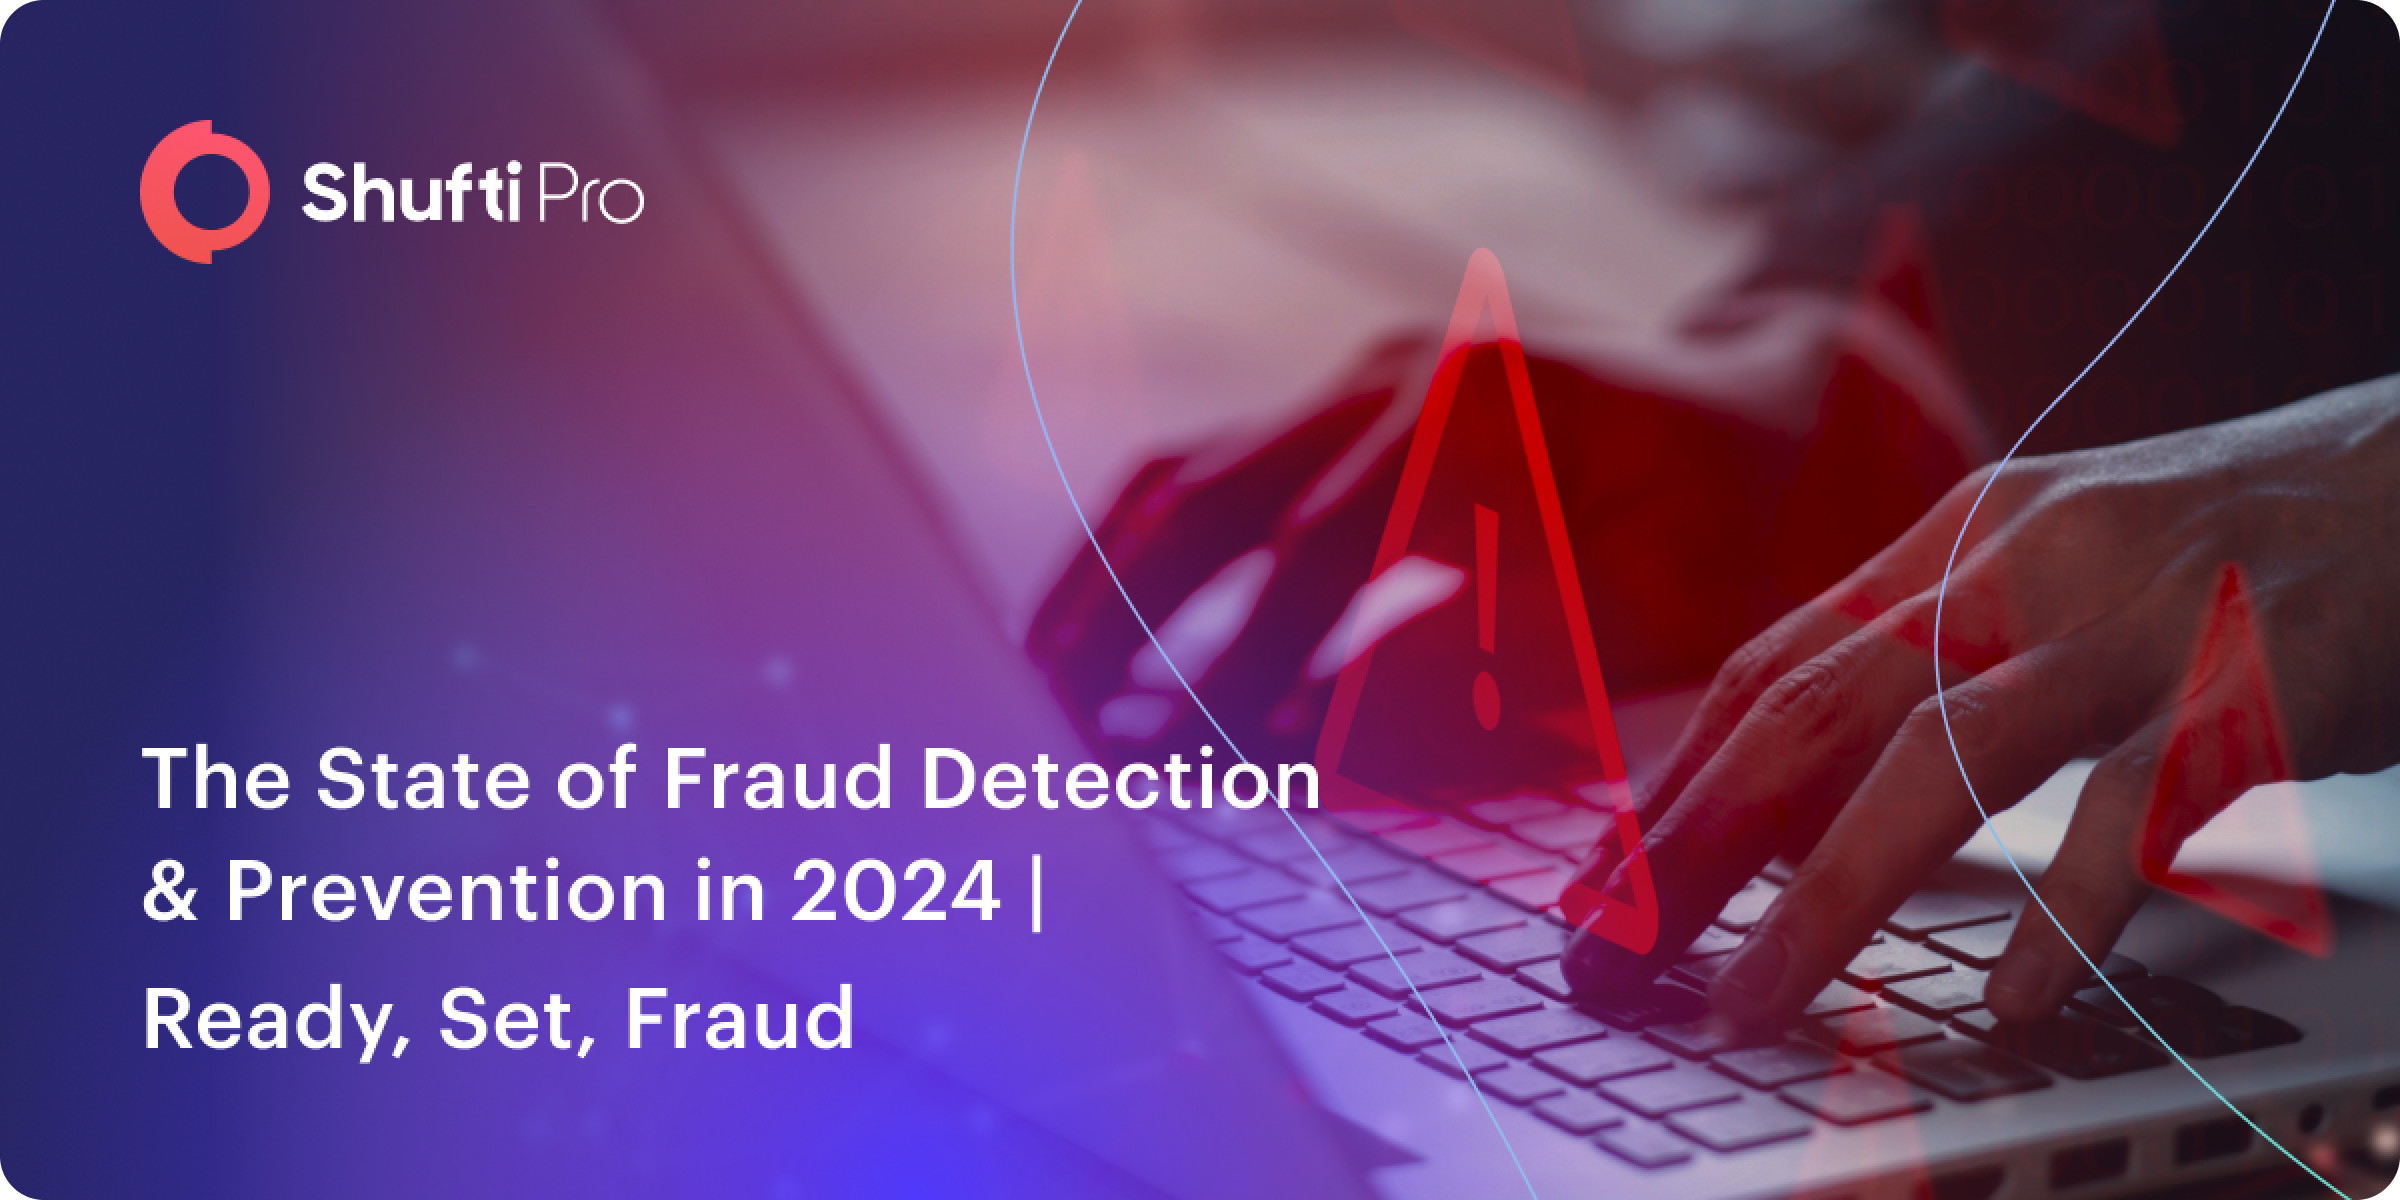 The State of Fraud Detection & Prevention in 2024 | Ready, Set, Fraud Thumbnail